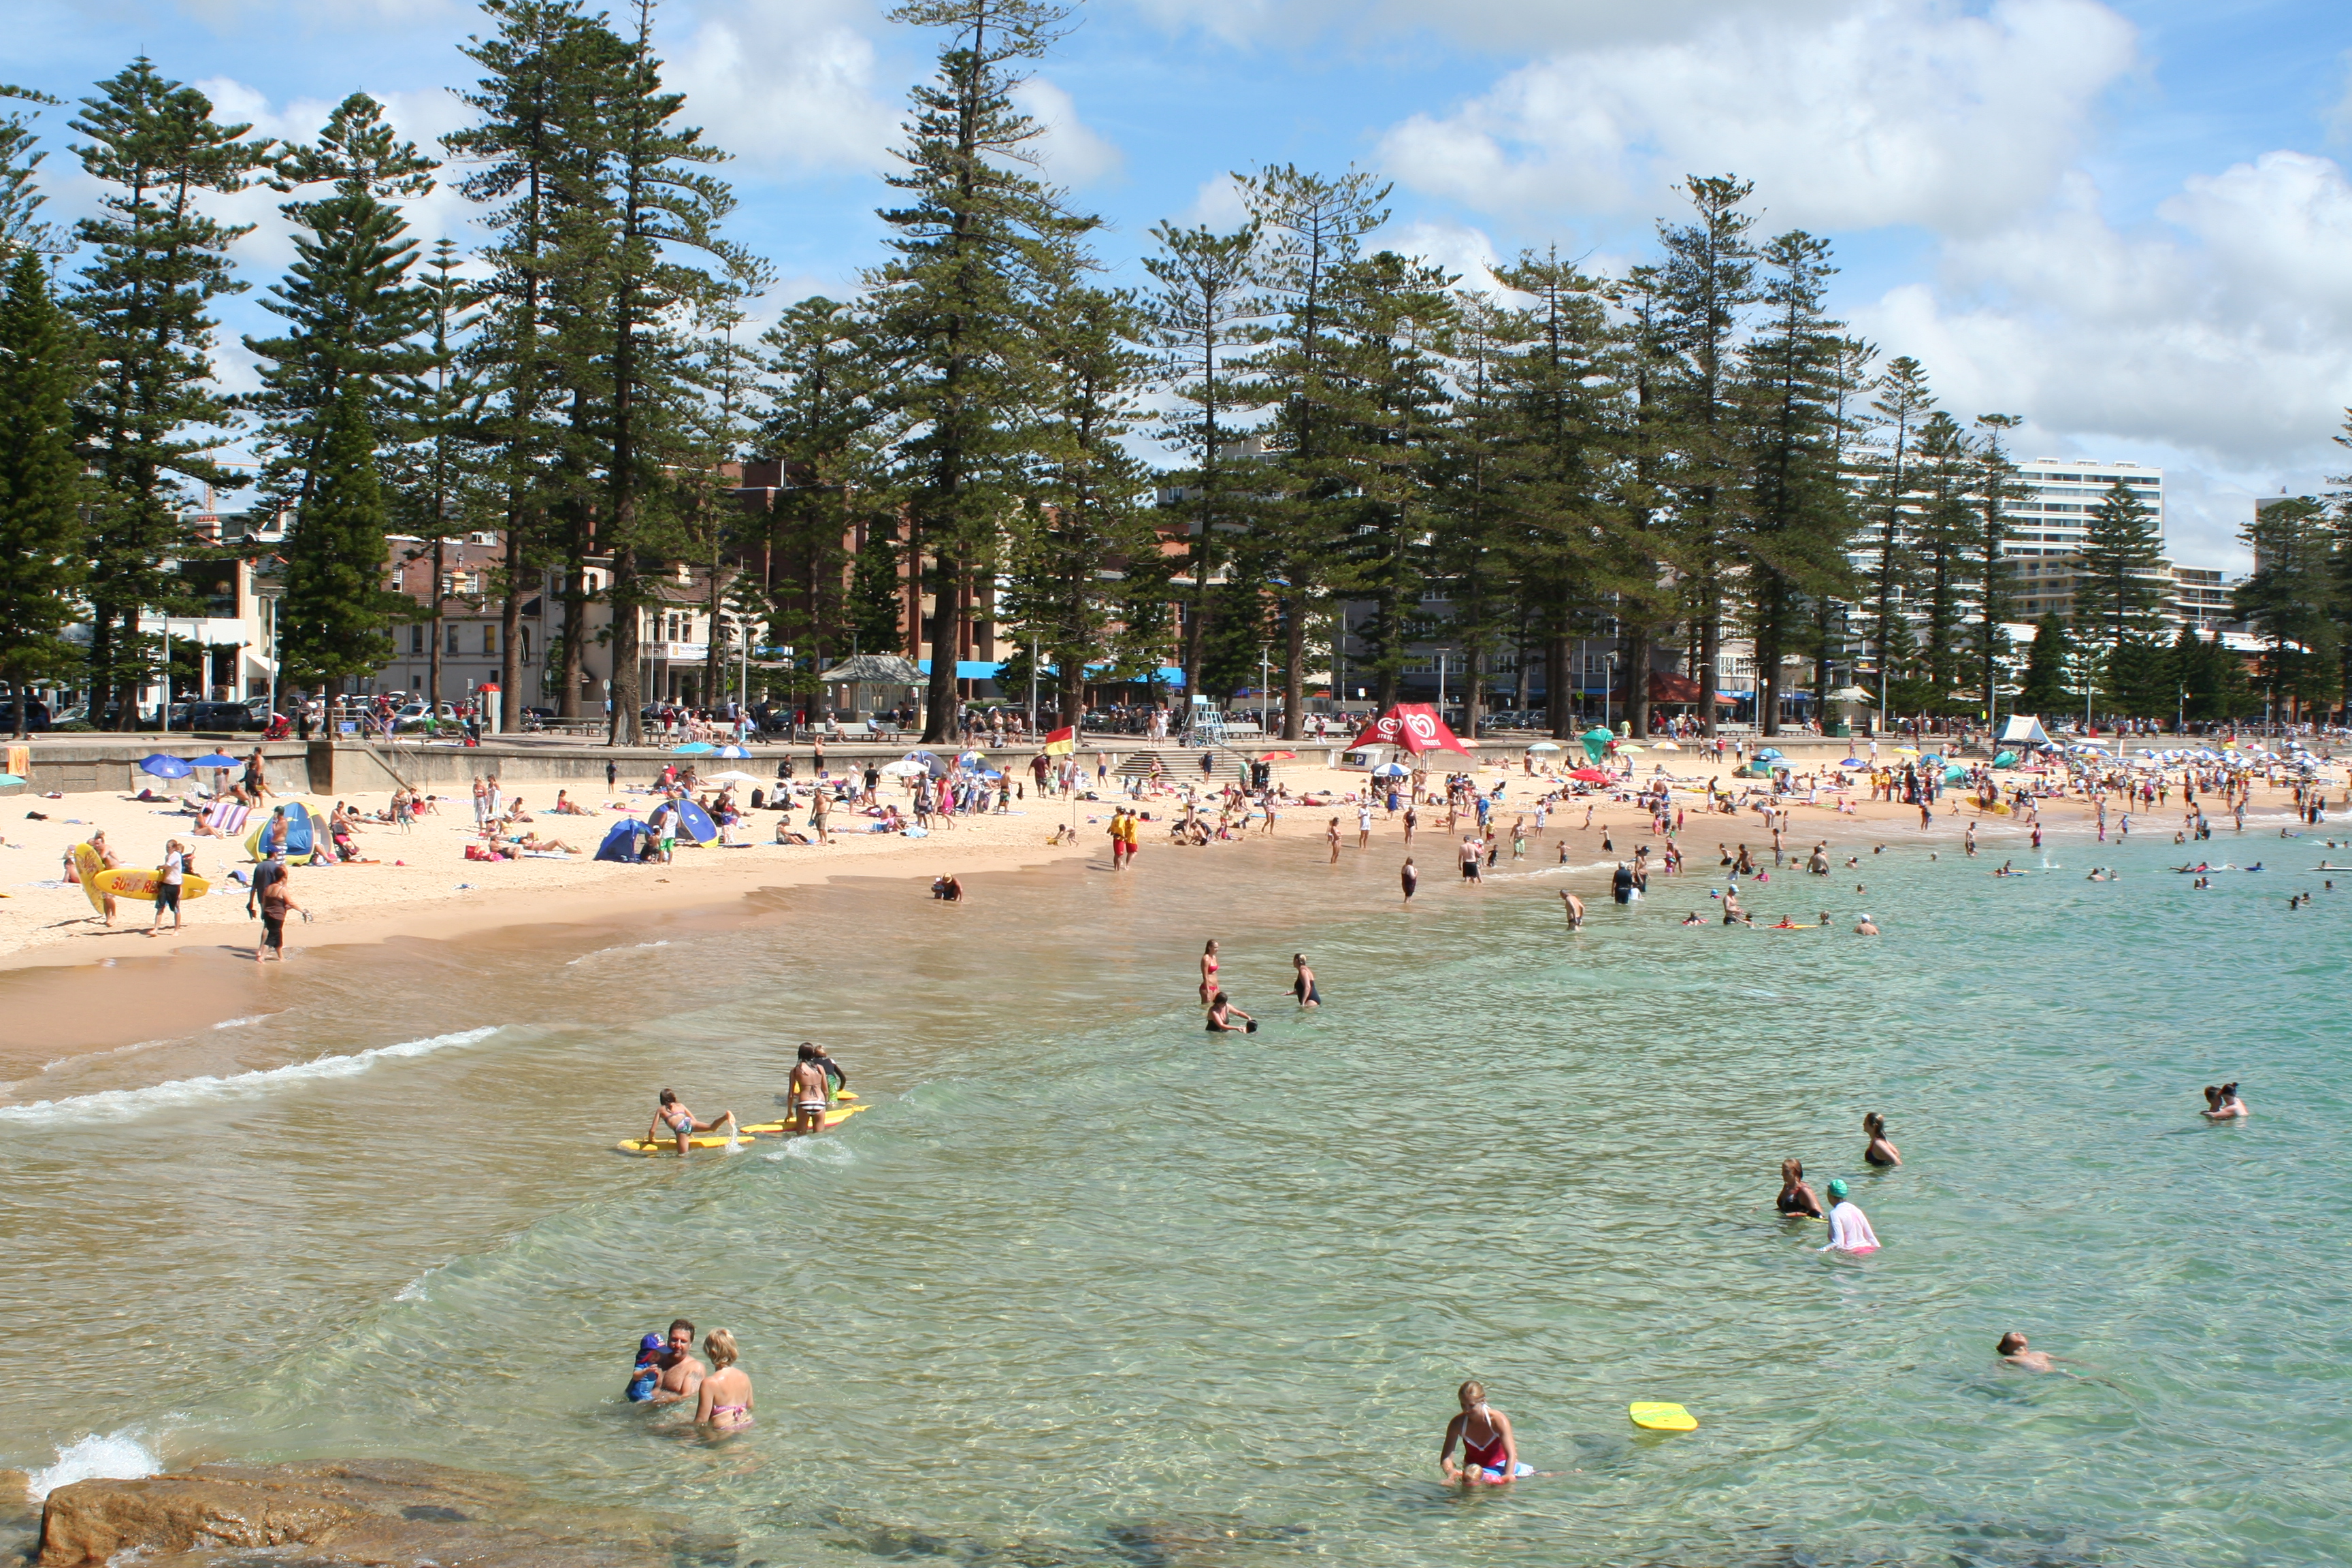 Going to the beach @ Manly